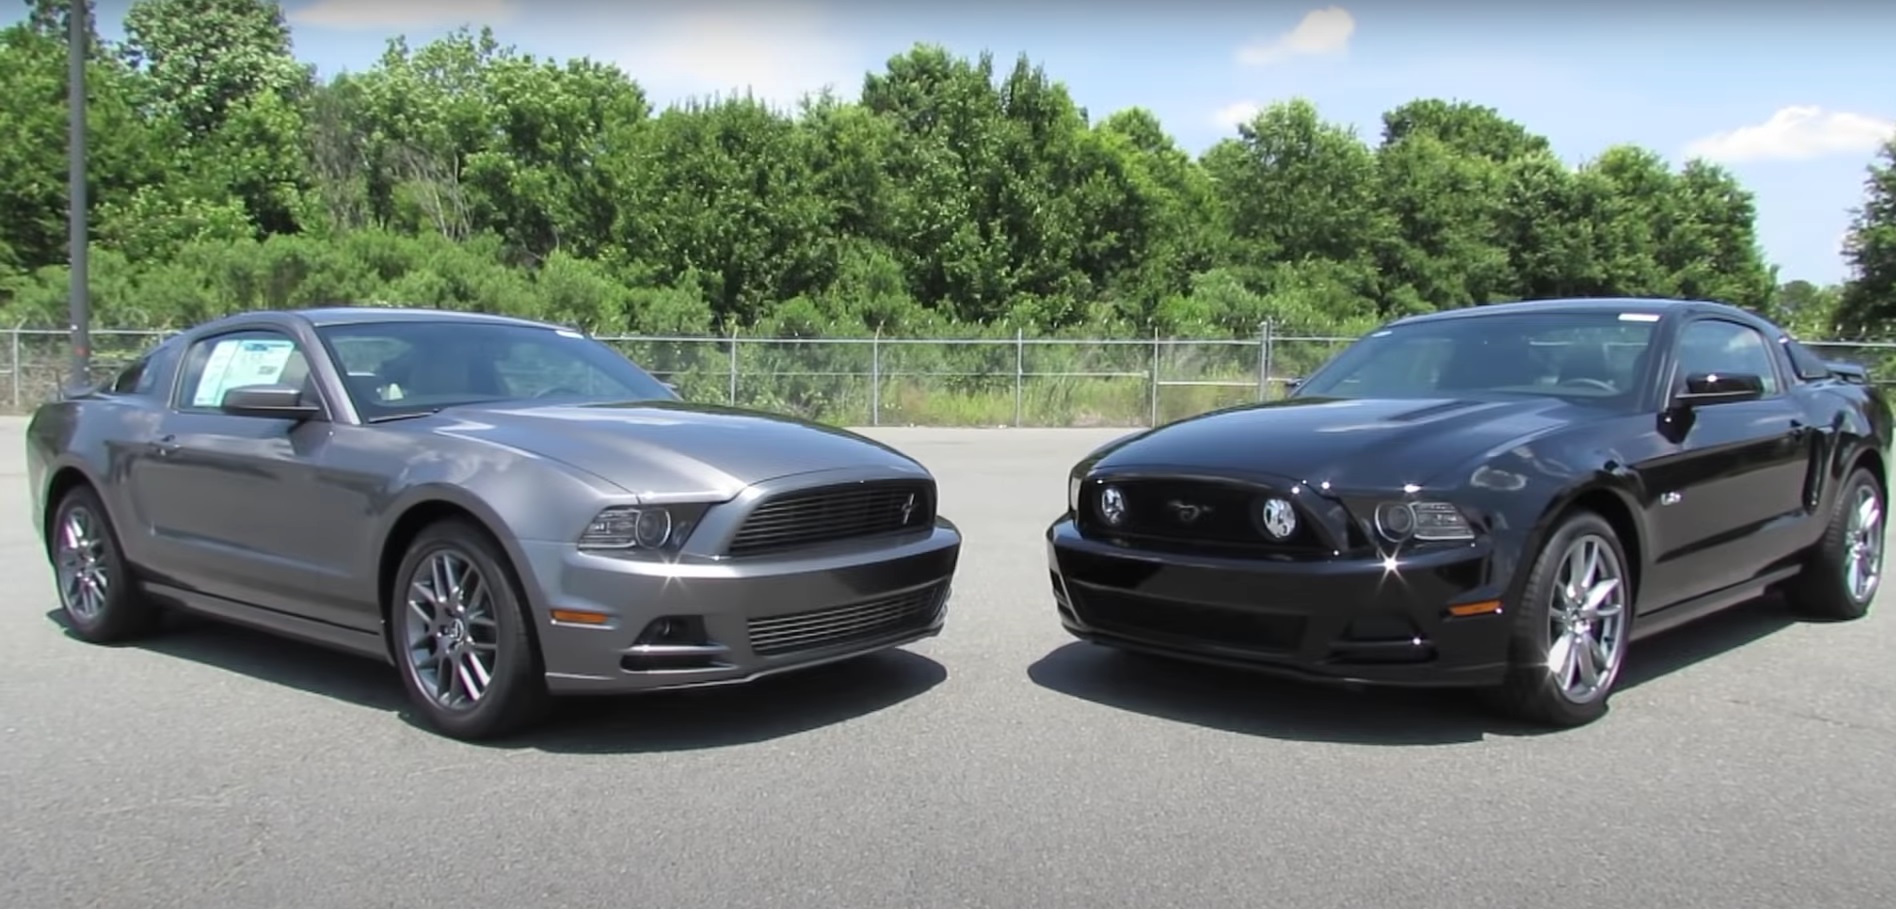 Video: 2013 Ford Mustang GT 5.0 and V6 In-Depth Look